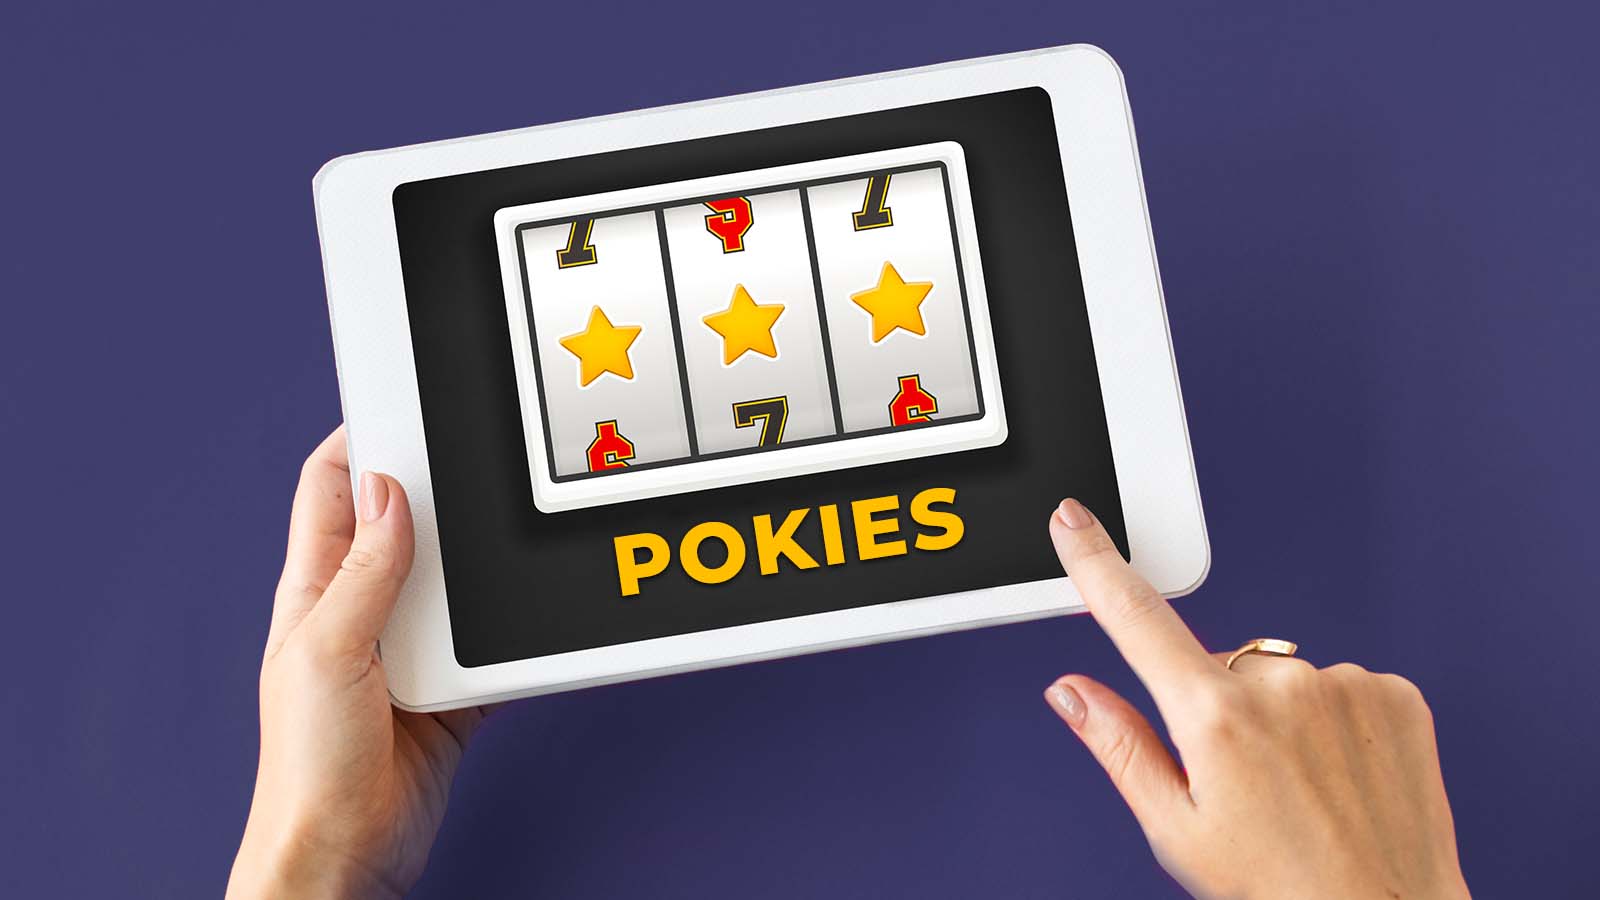 Pokies Meaning Dispelling Any Confusion